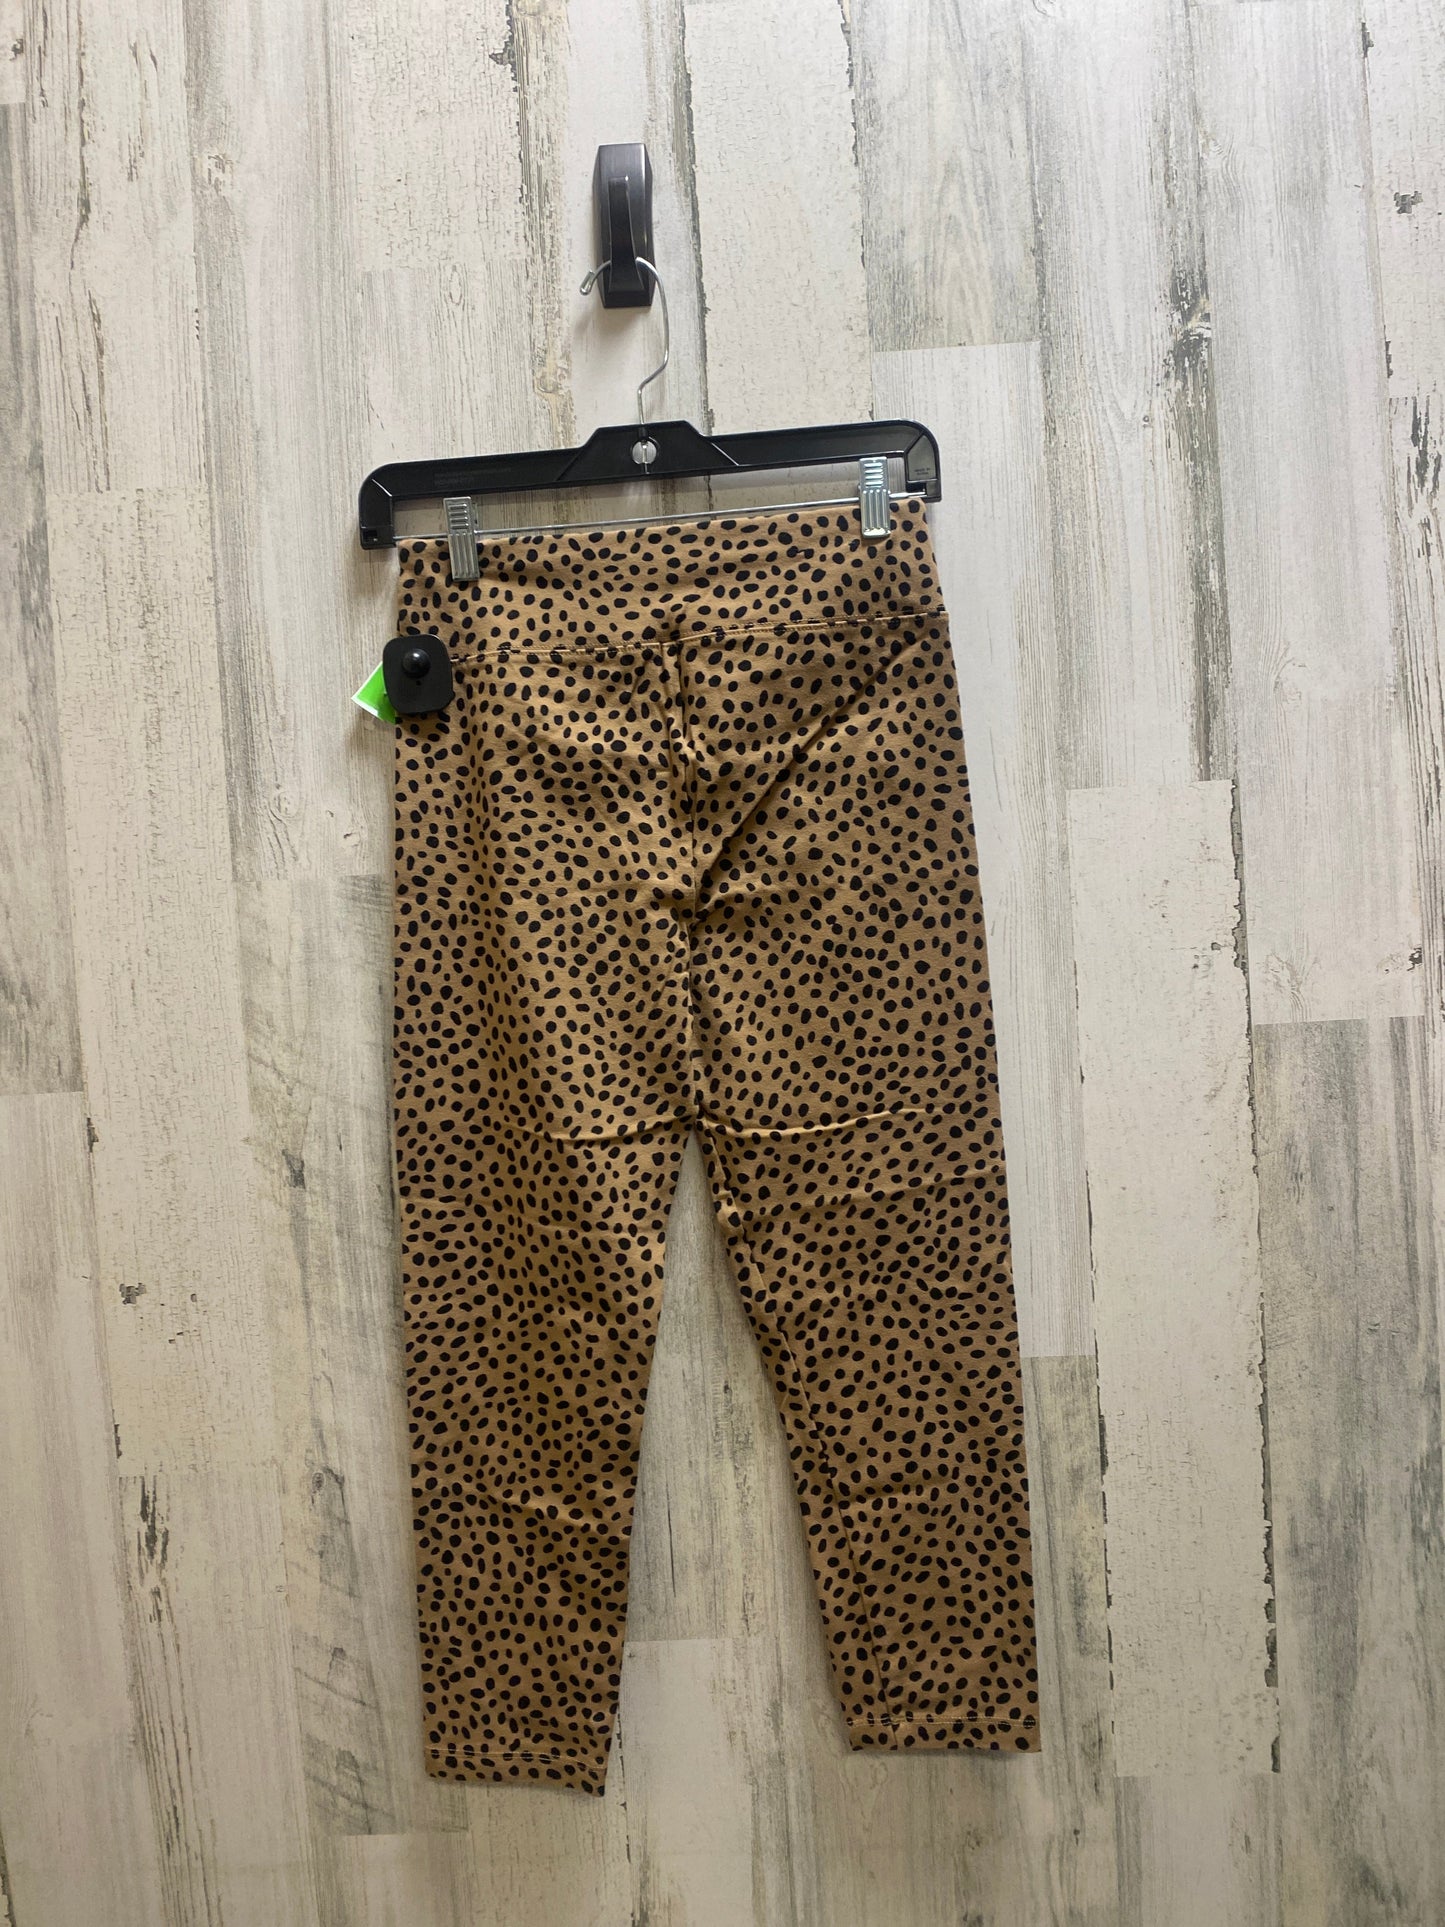 Athletic Leggings By J Crew  Size: S